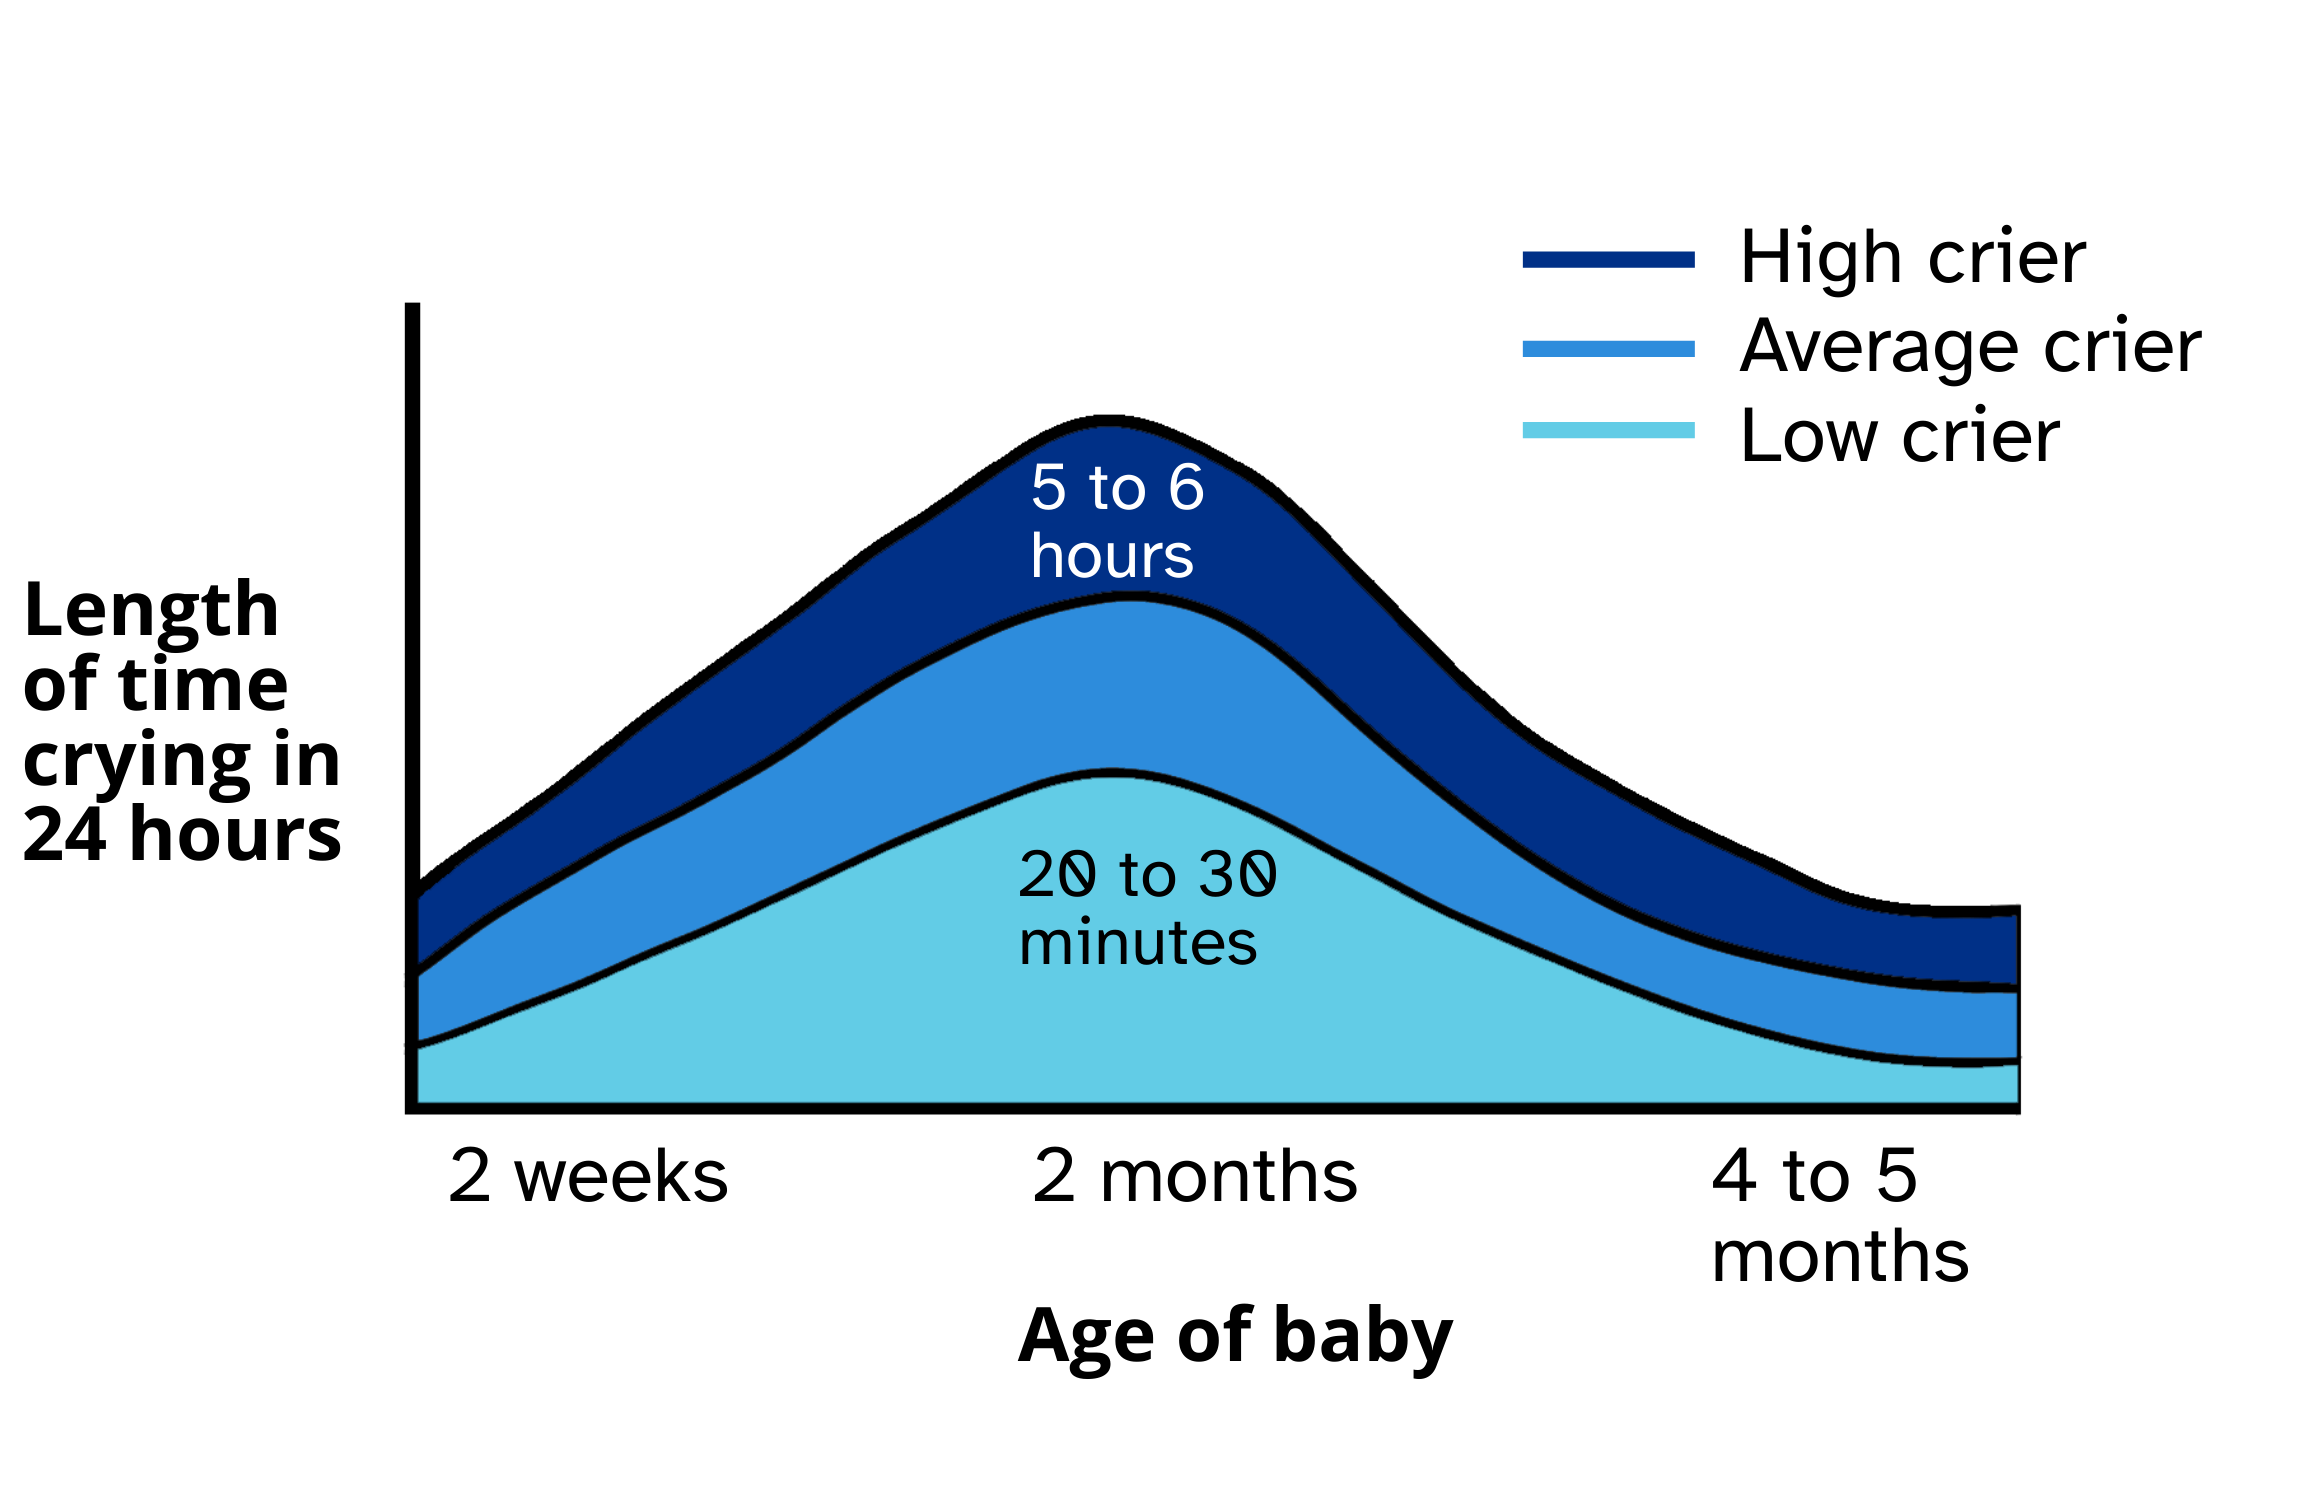 A graph showing the length of time a baby will cry in a 24 hour period from 2 weeks to 4 to 5 months old. At 2 months old a low crier will cry for 20 to 30 minutes in a 24 hour period. An high crier will cry for 5 to 6 hours in a 24 hour period.